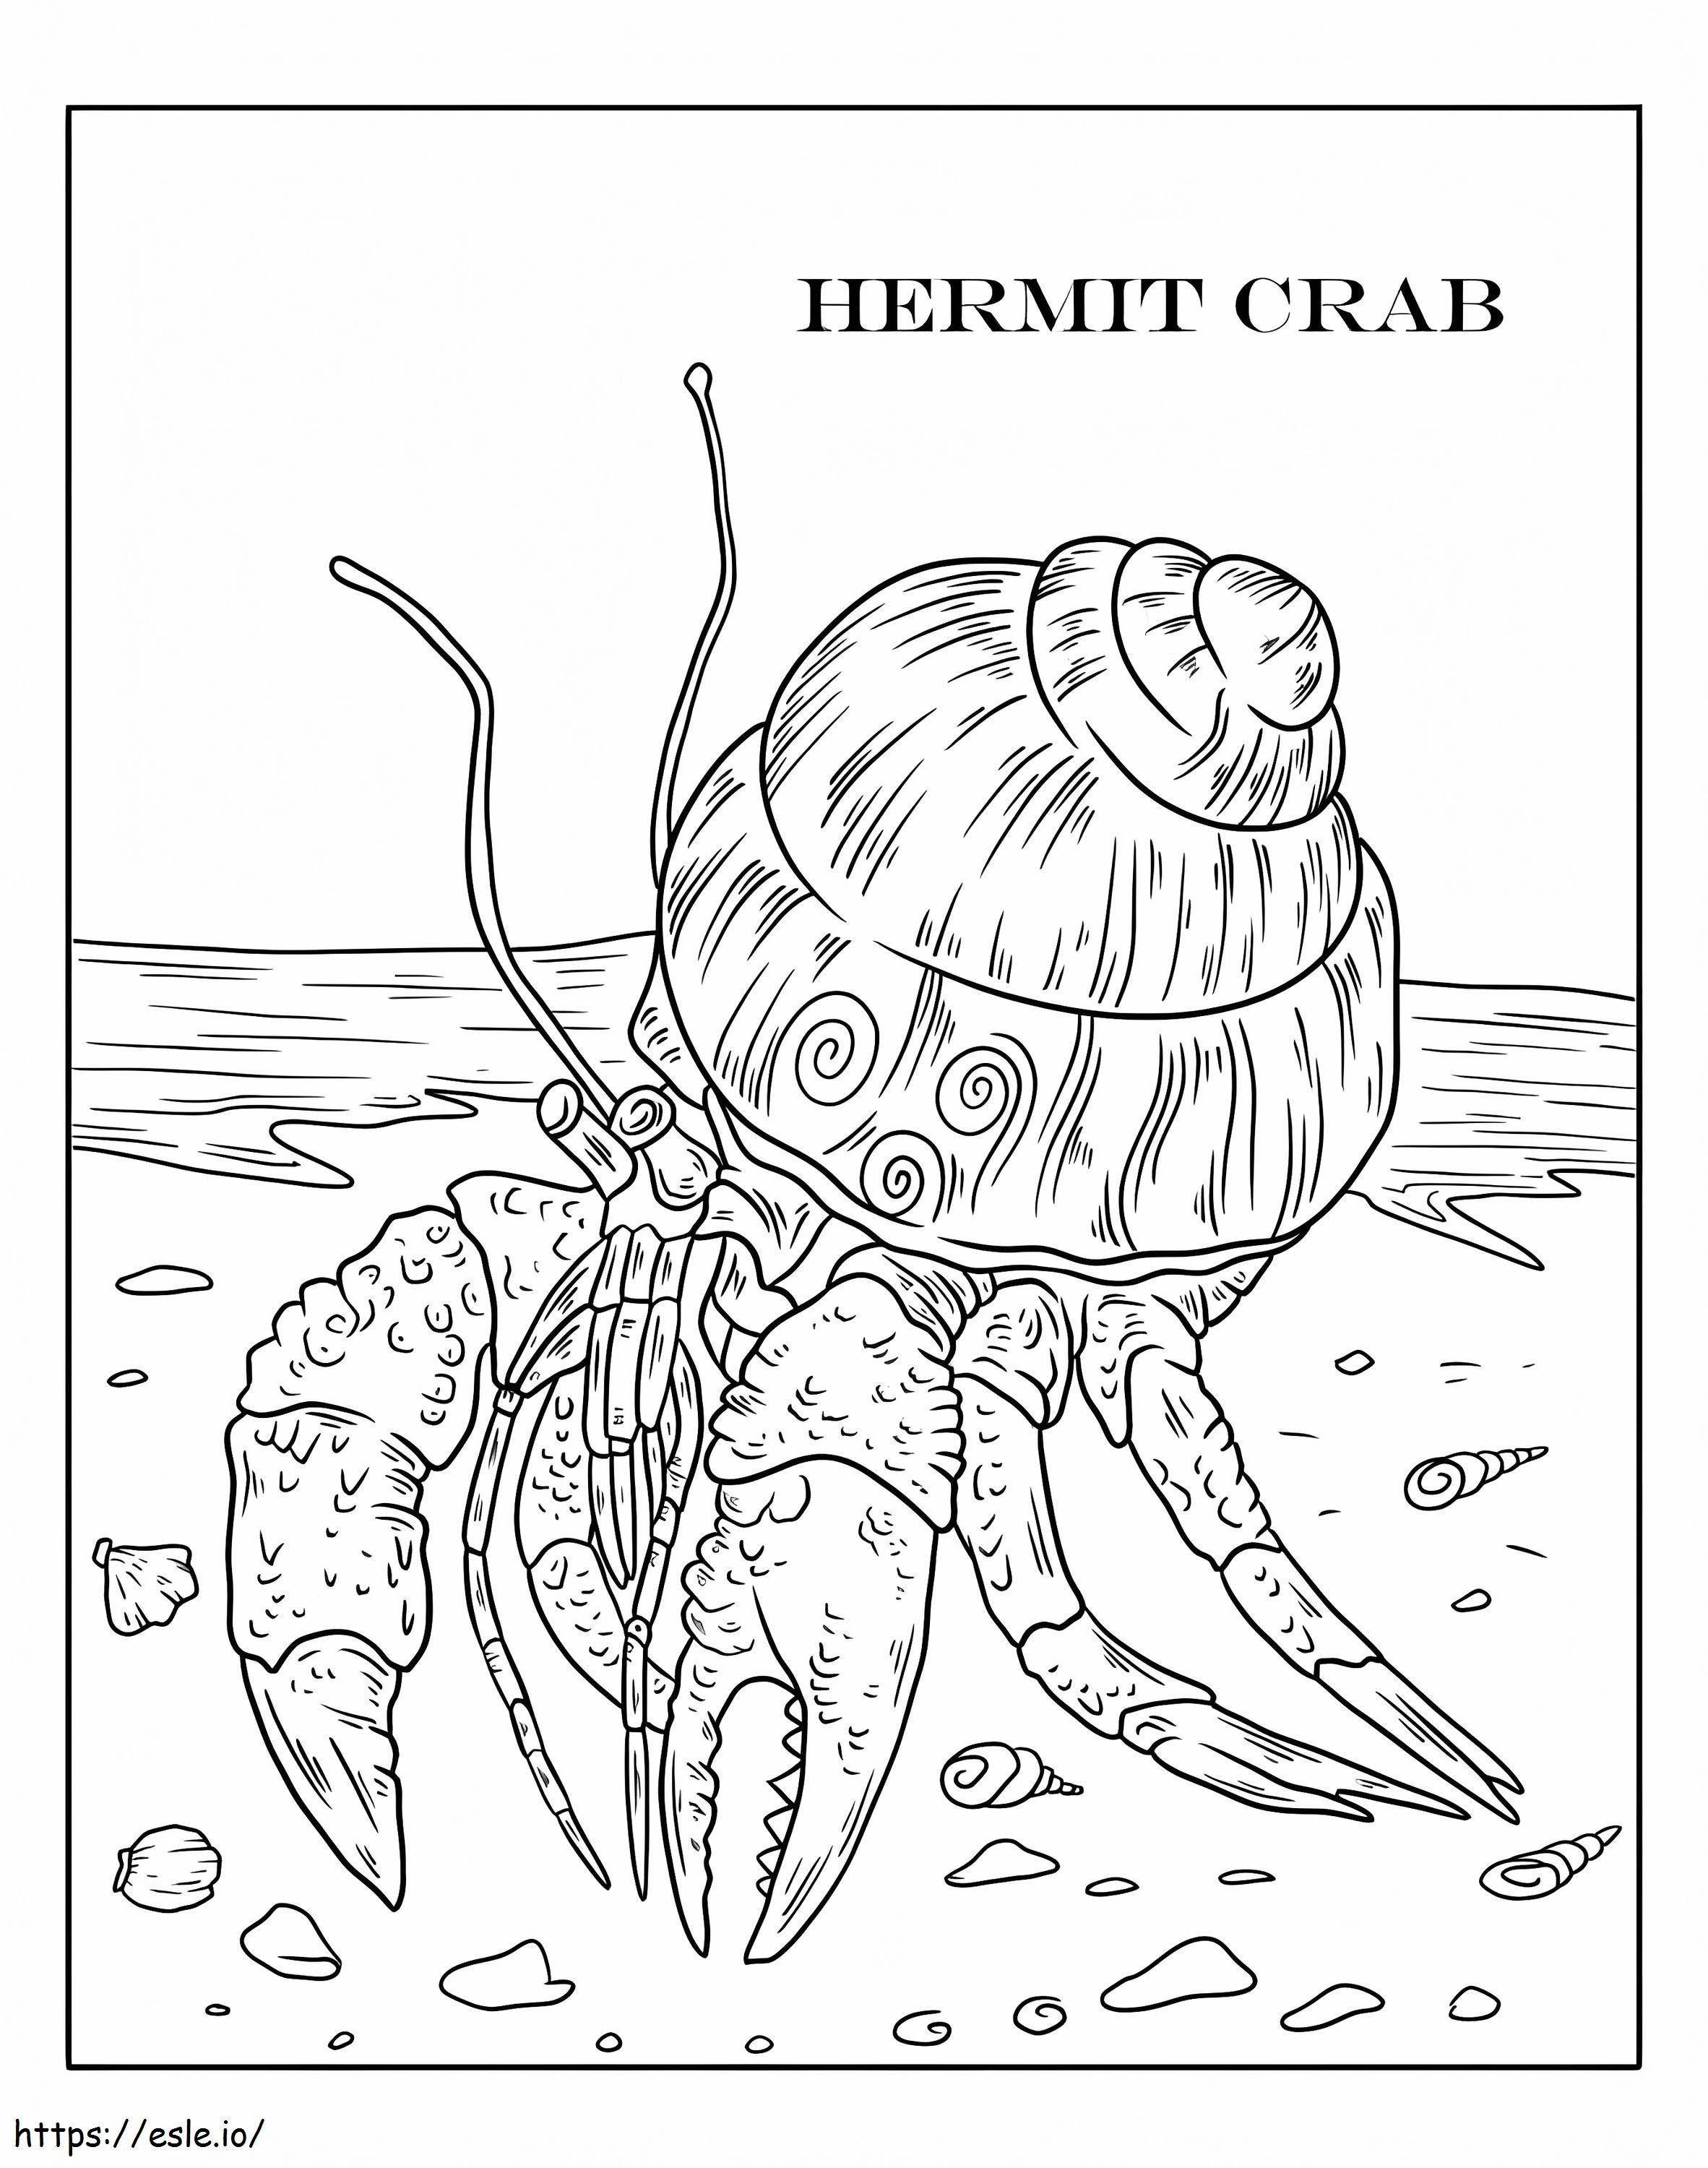 Hermit Crab On The Beach coloring page